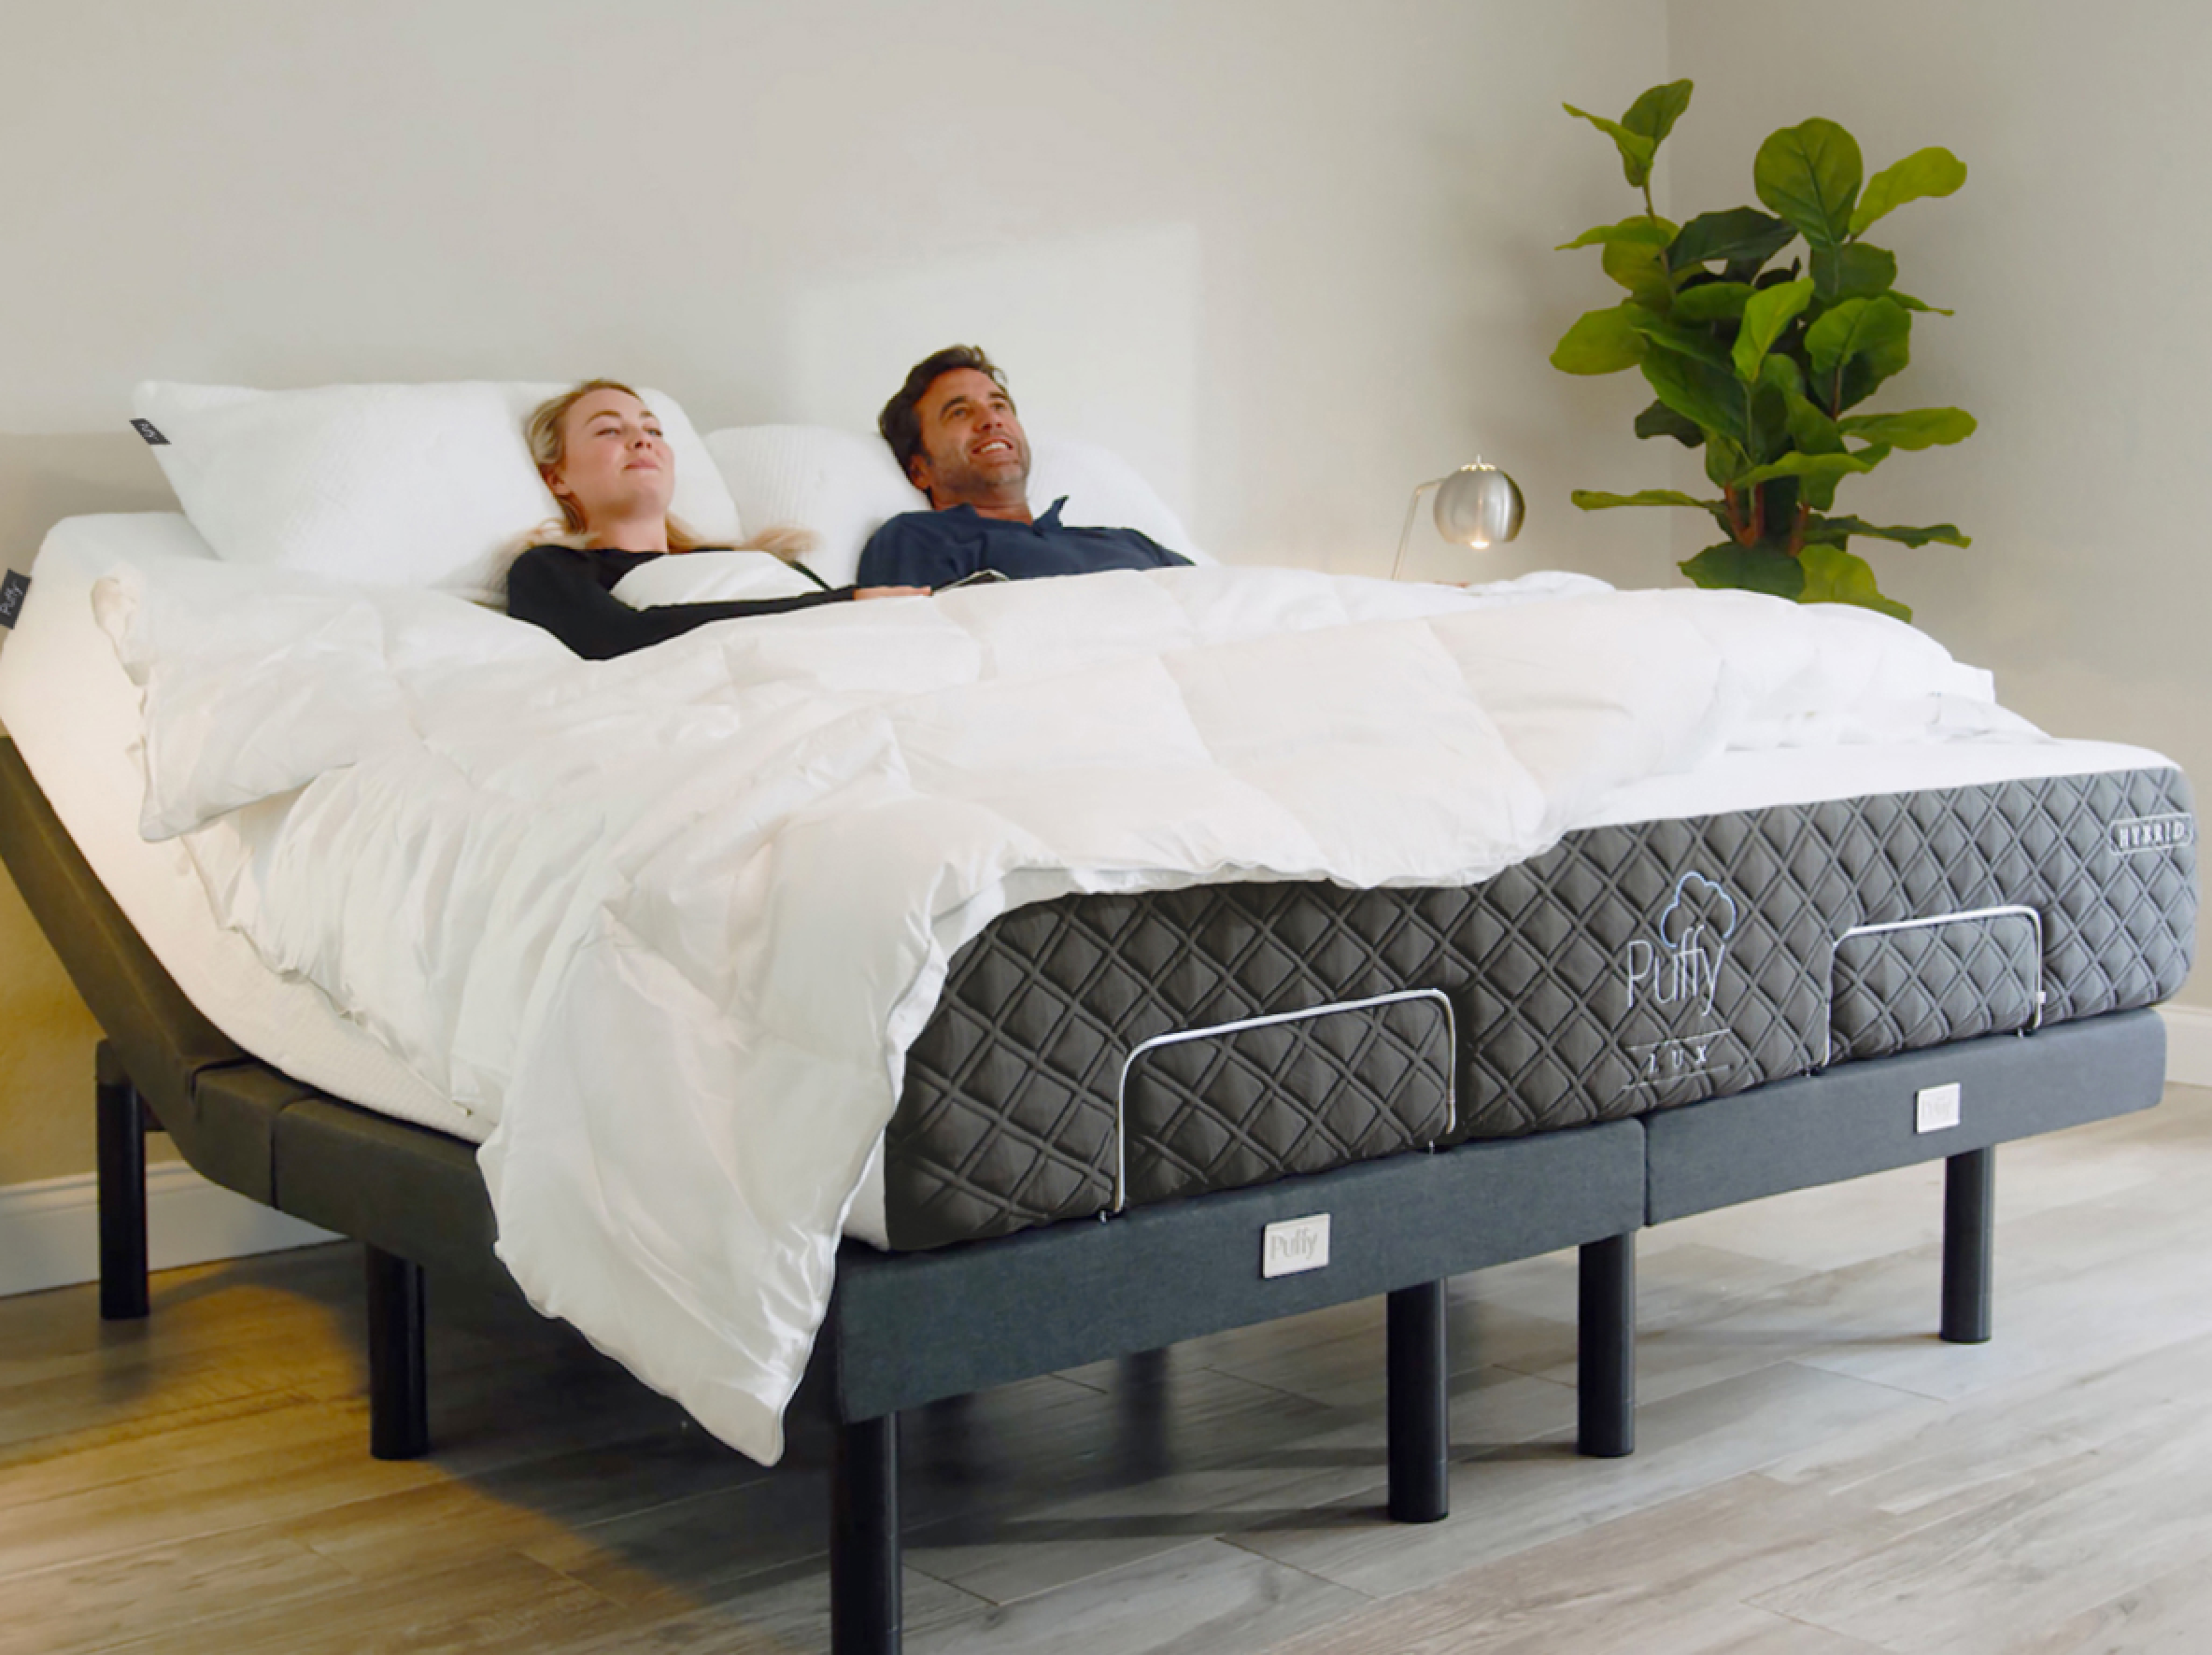 Best Mattresses for Adjustable Beds: Do You Need A Special Mattress?